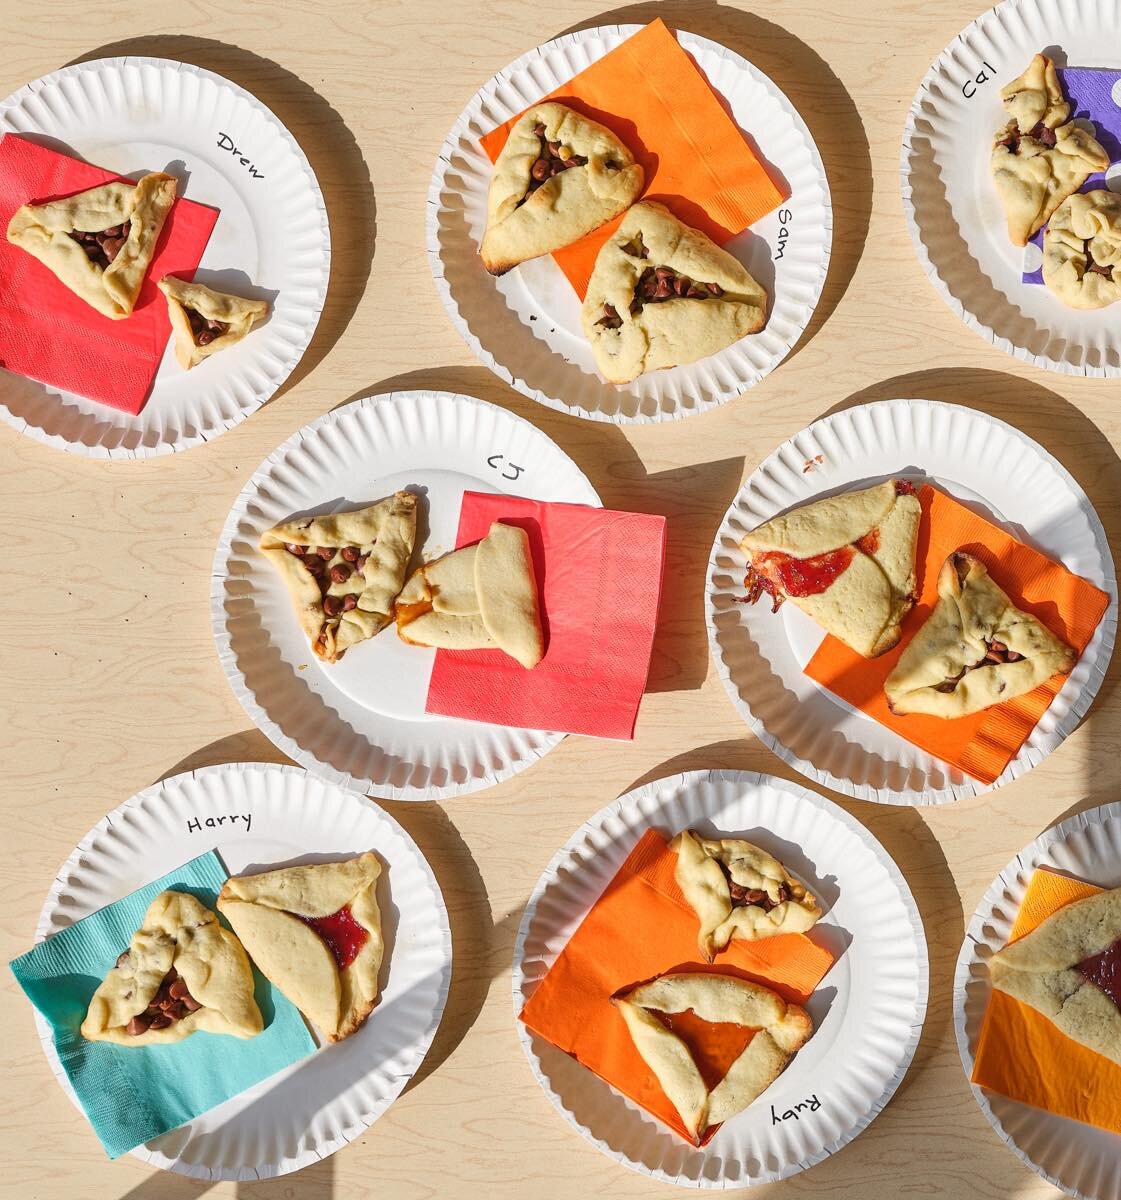 We are celebrating Purim today with hamantaschen from The New Jewish Cookbook by Todd and Ellen Gray. Swipe to see little helping hands making their own at Temple Sinai for @saralrosenblum. 

Purim is a joyful Jewish holiday celebrating the story of 